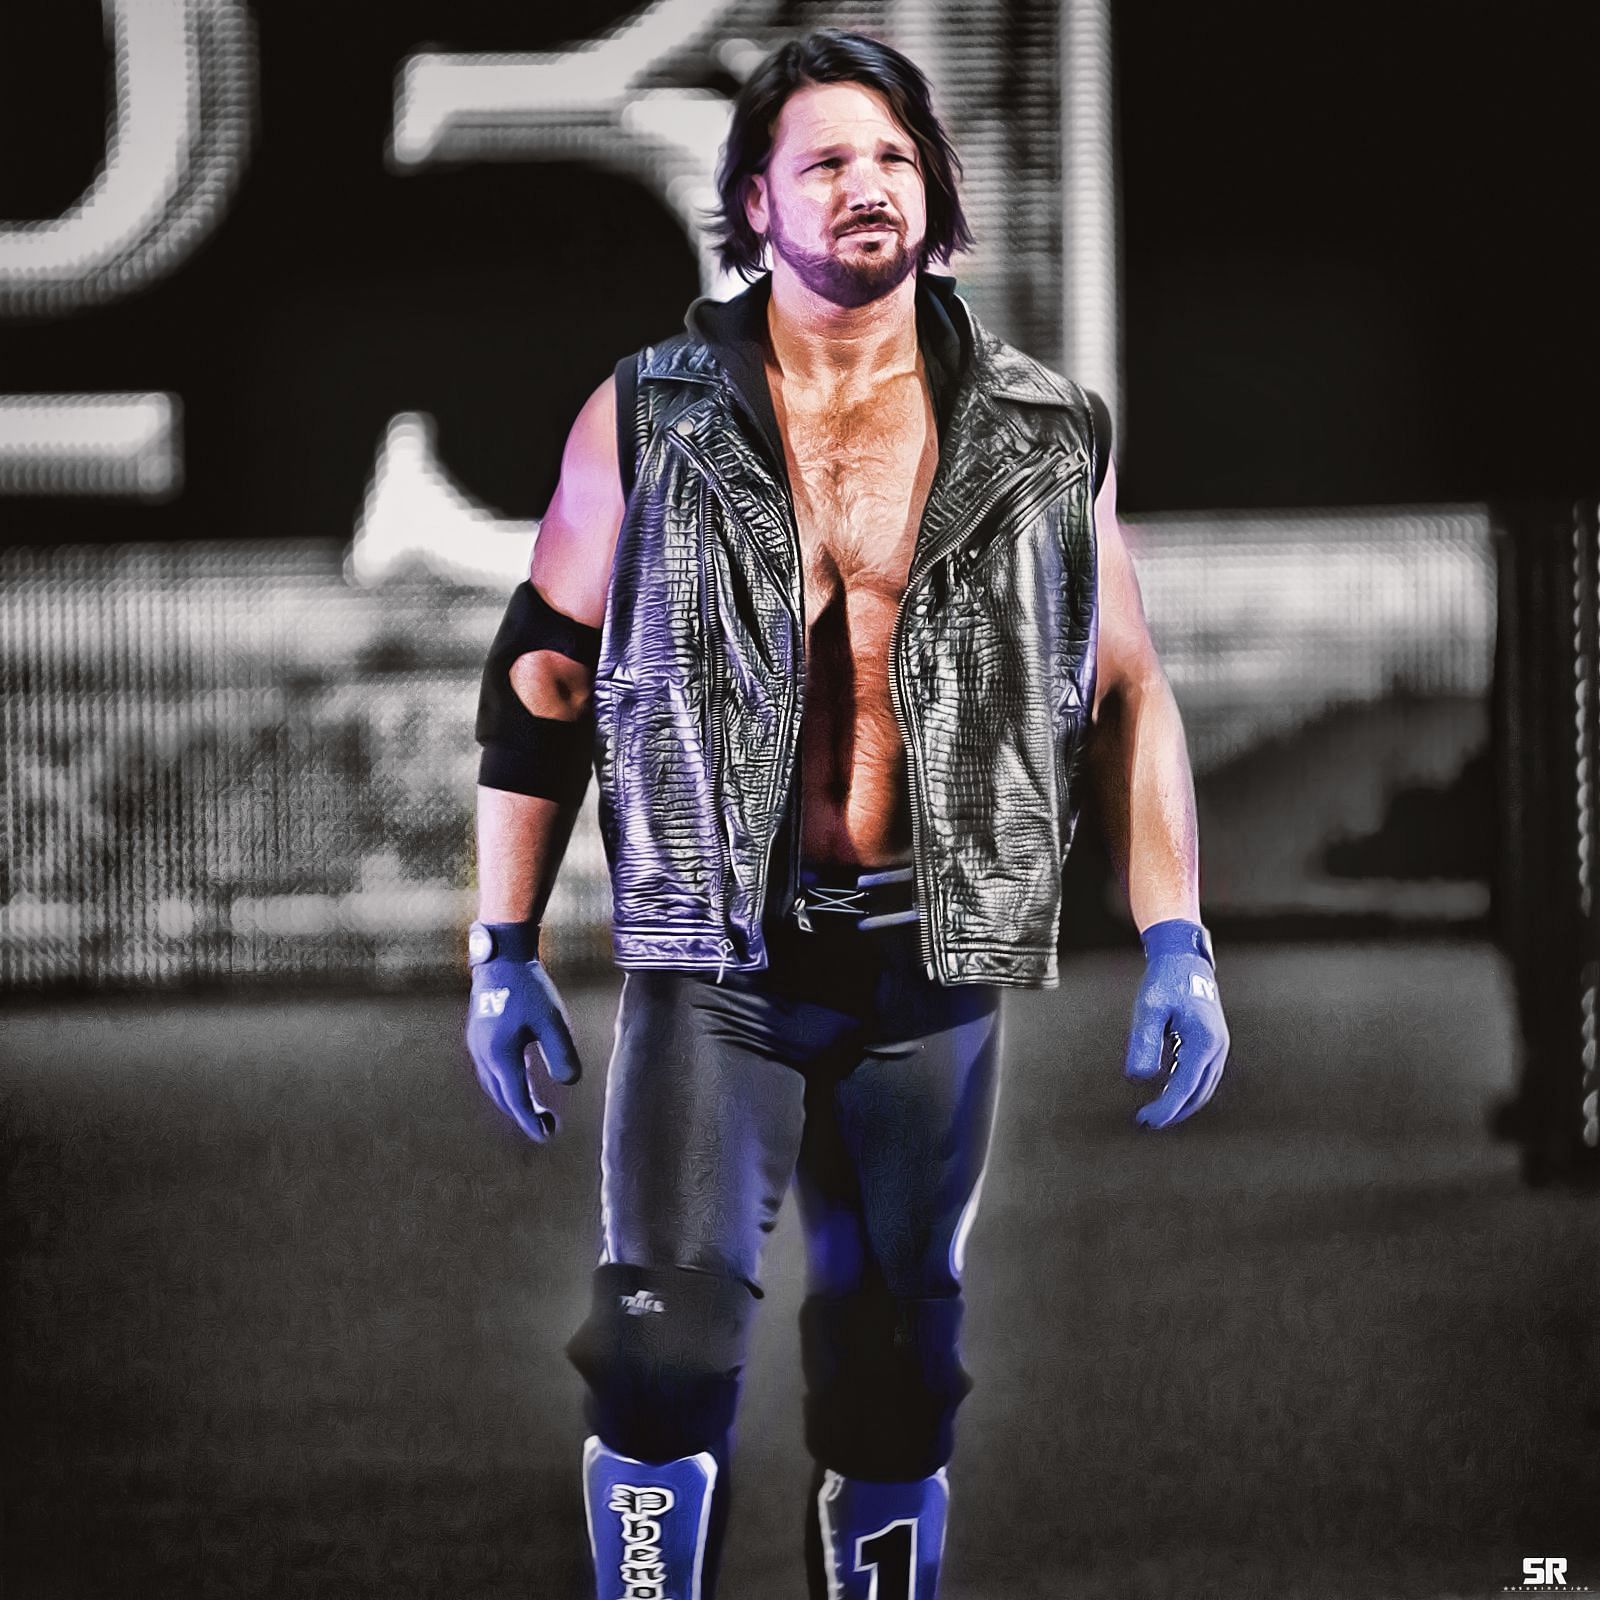 AJ Styles made a shocking debut for WWE in the 2016 Royal Rumble.